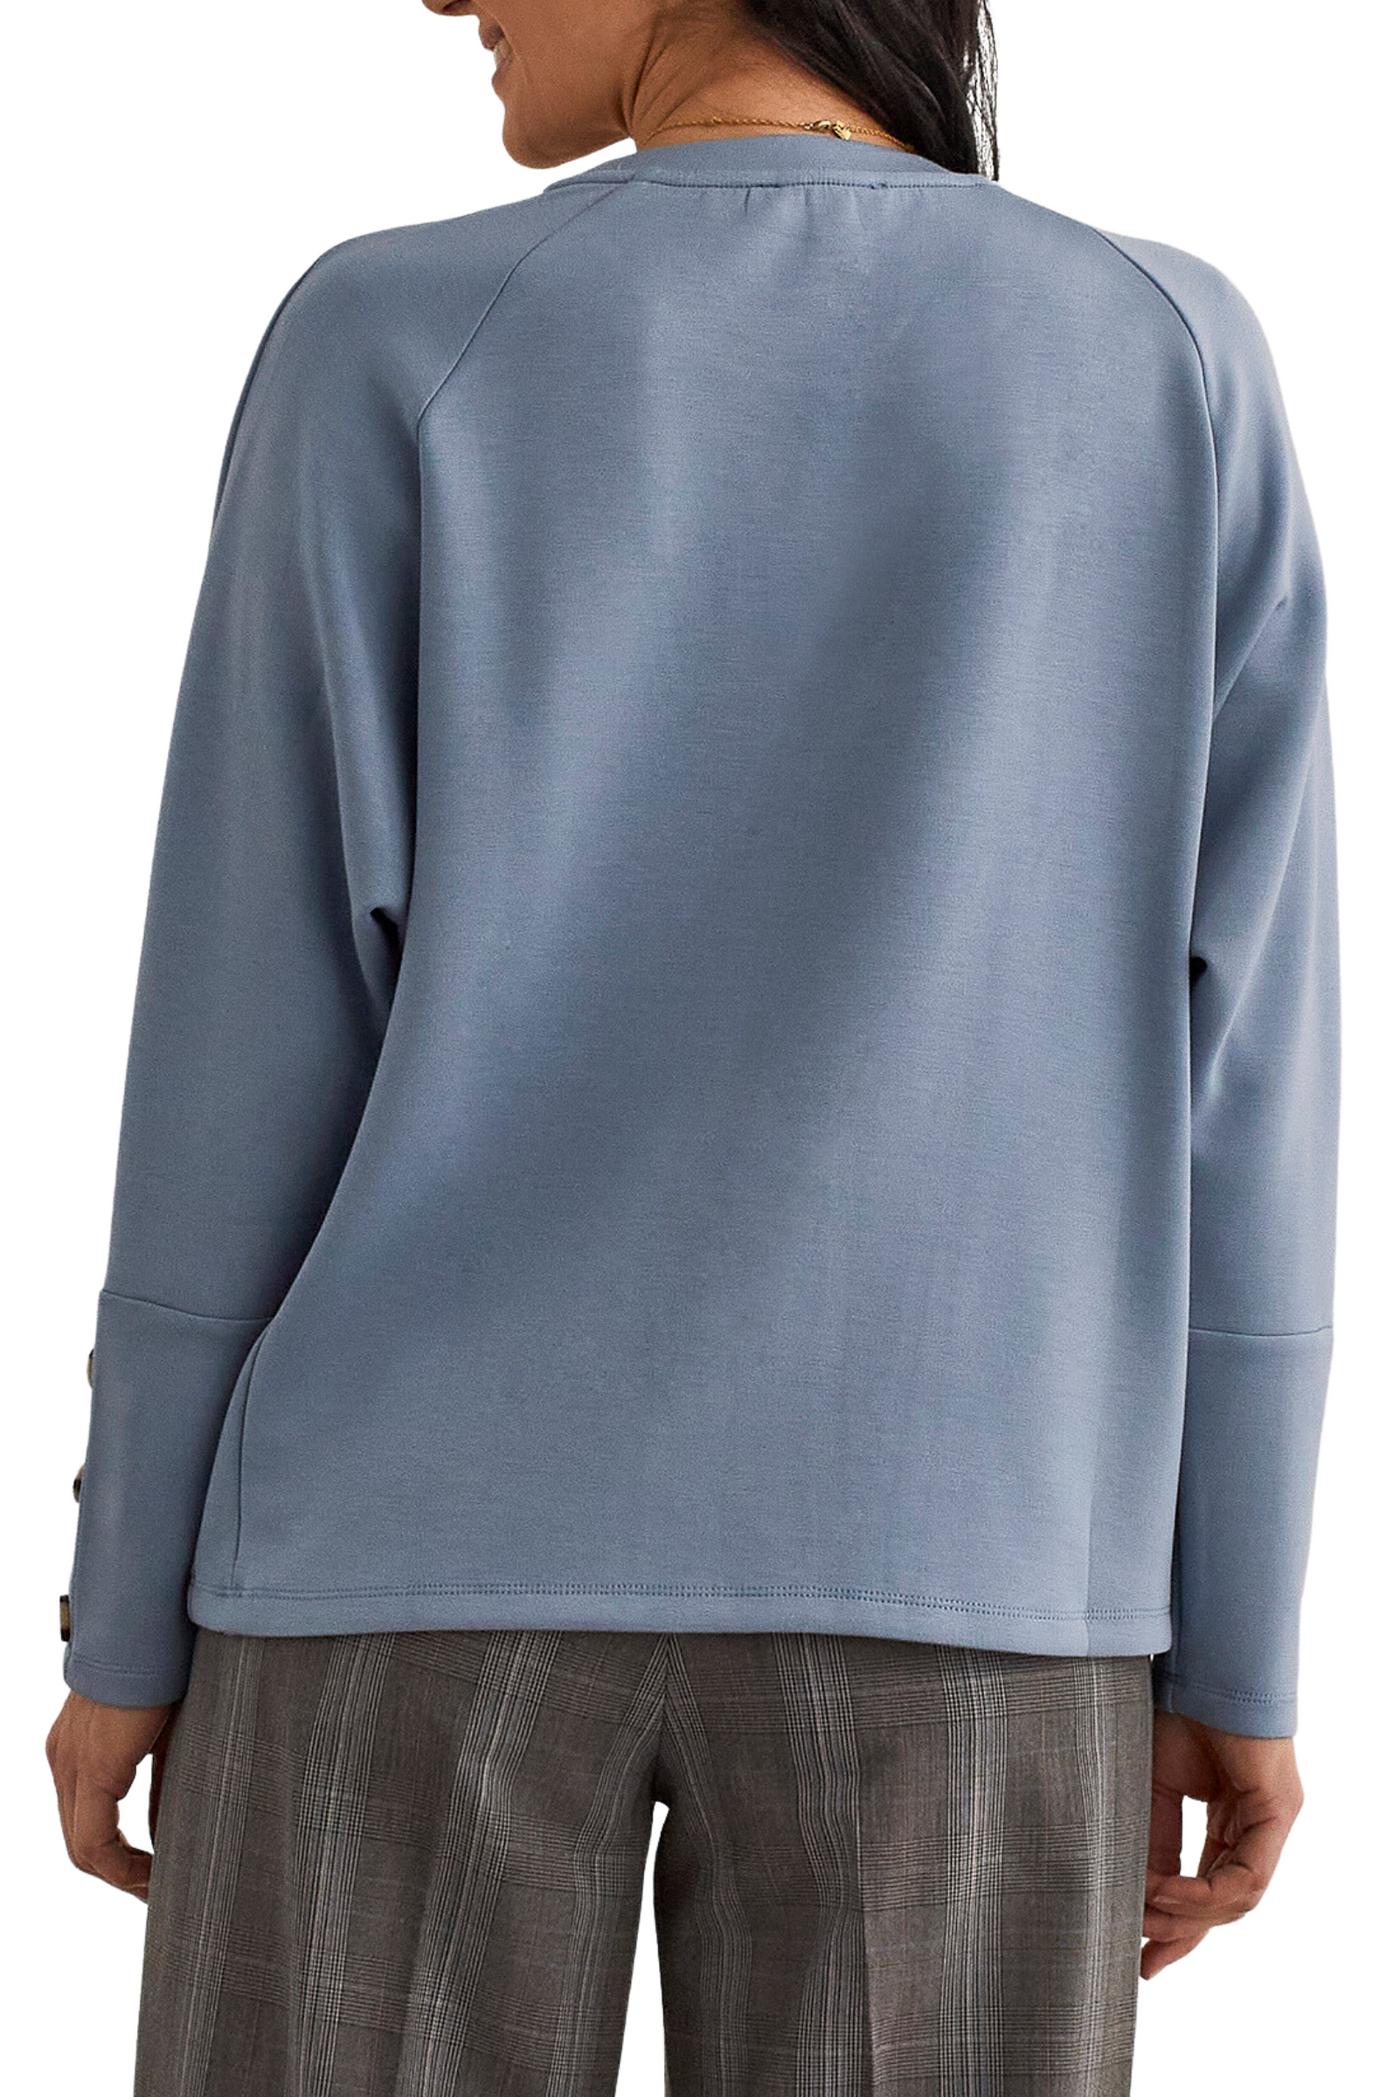 Crew Neck Long Sleeve with Sleeve Buttons